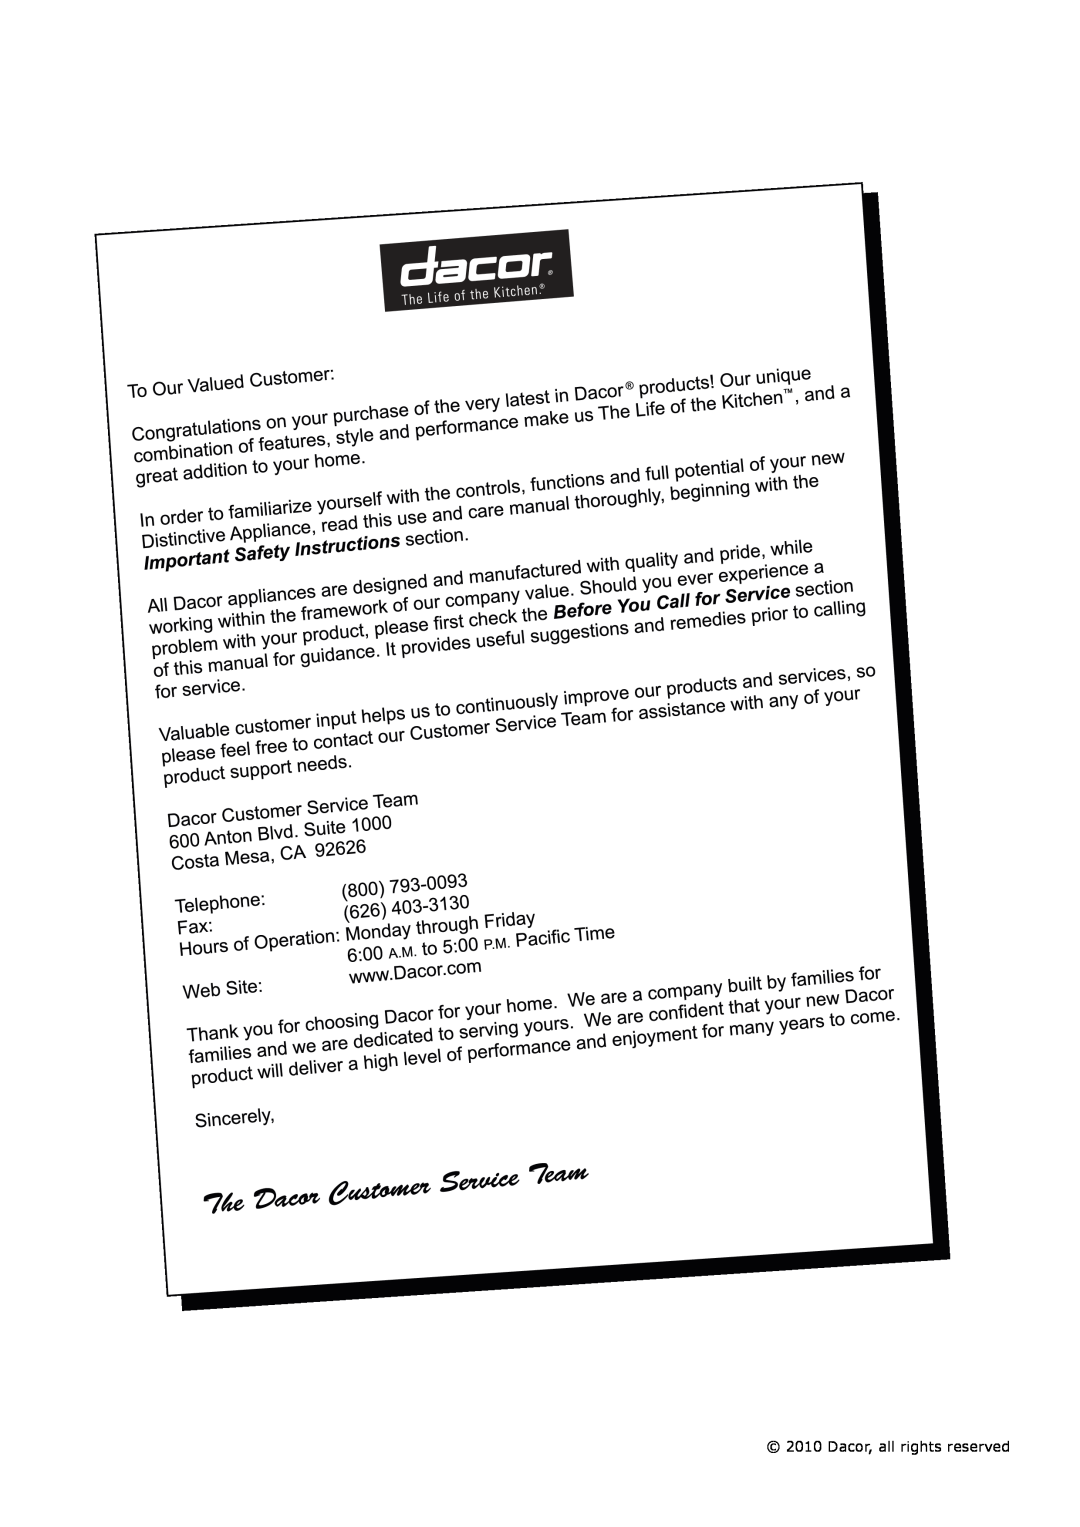 Dacor EDWH24S, IDWH24 manual Dacor, all rights reserved 